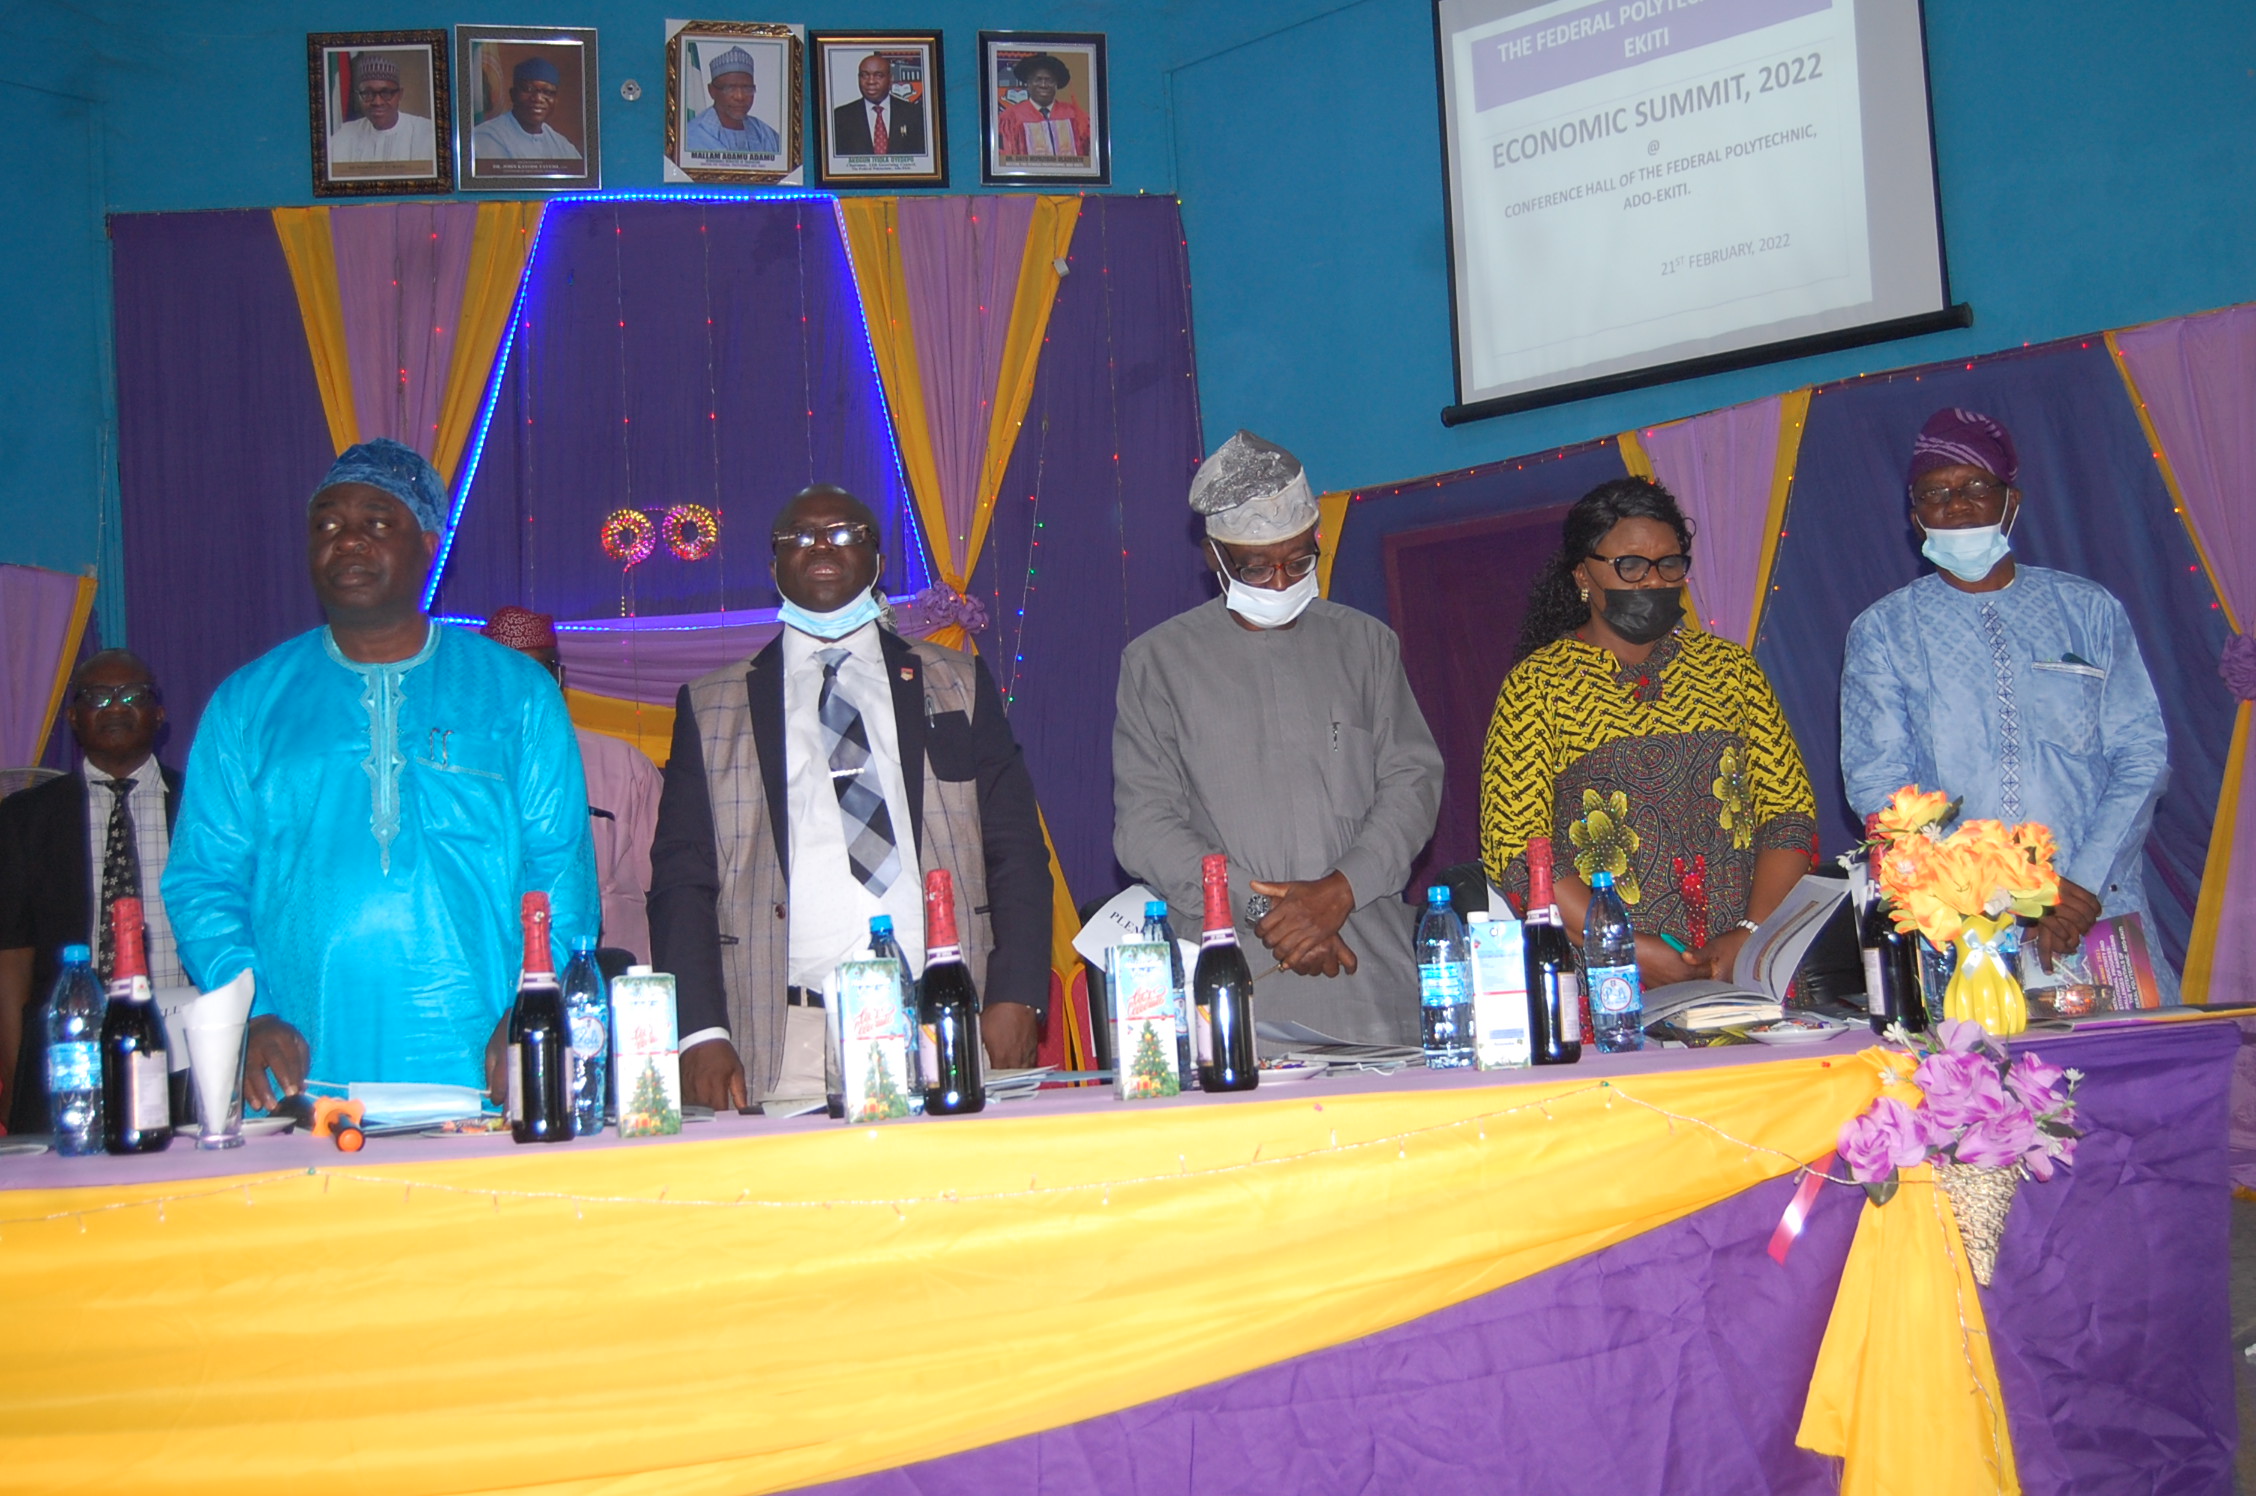 Communique for The 1st Economic Summit of the Federal Polytechnic, Ado-Ekiti Held On The 22nd February, 2022​